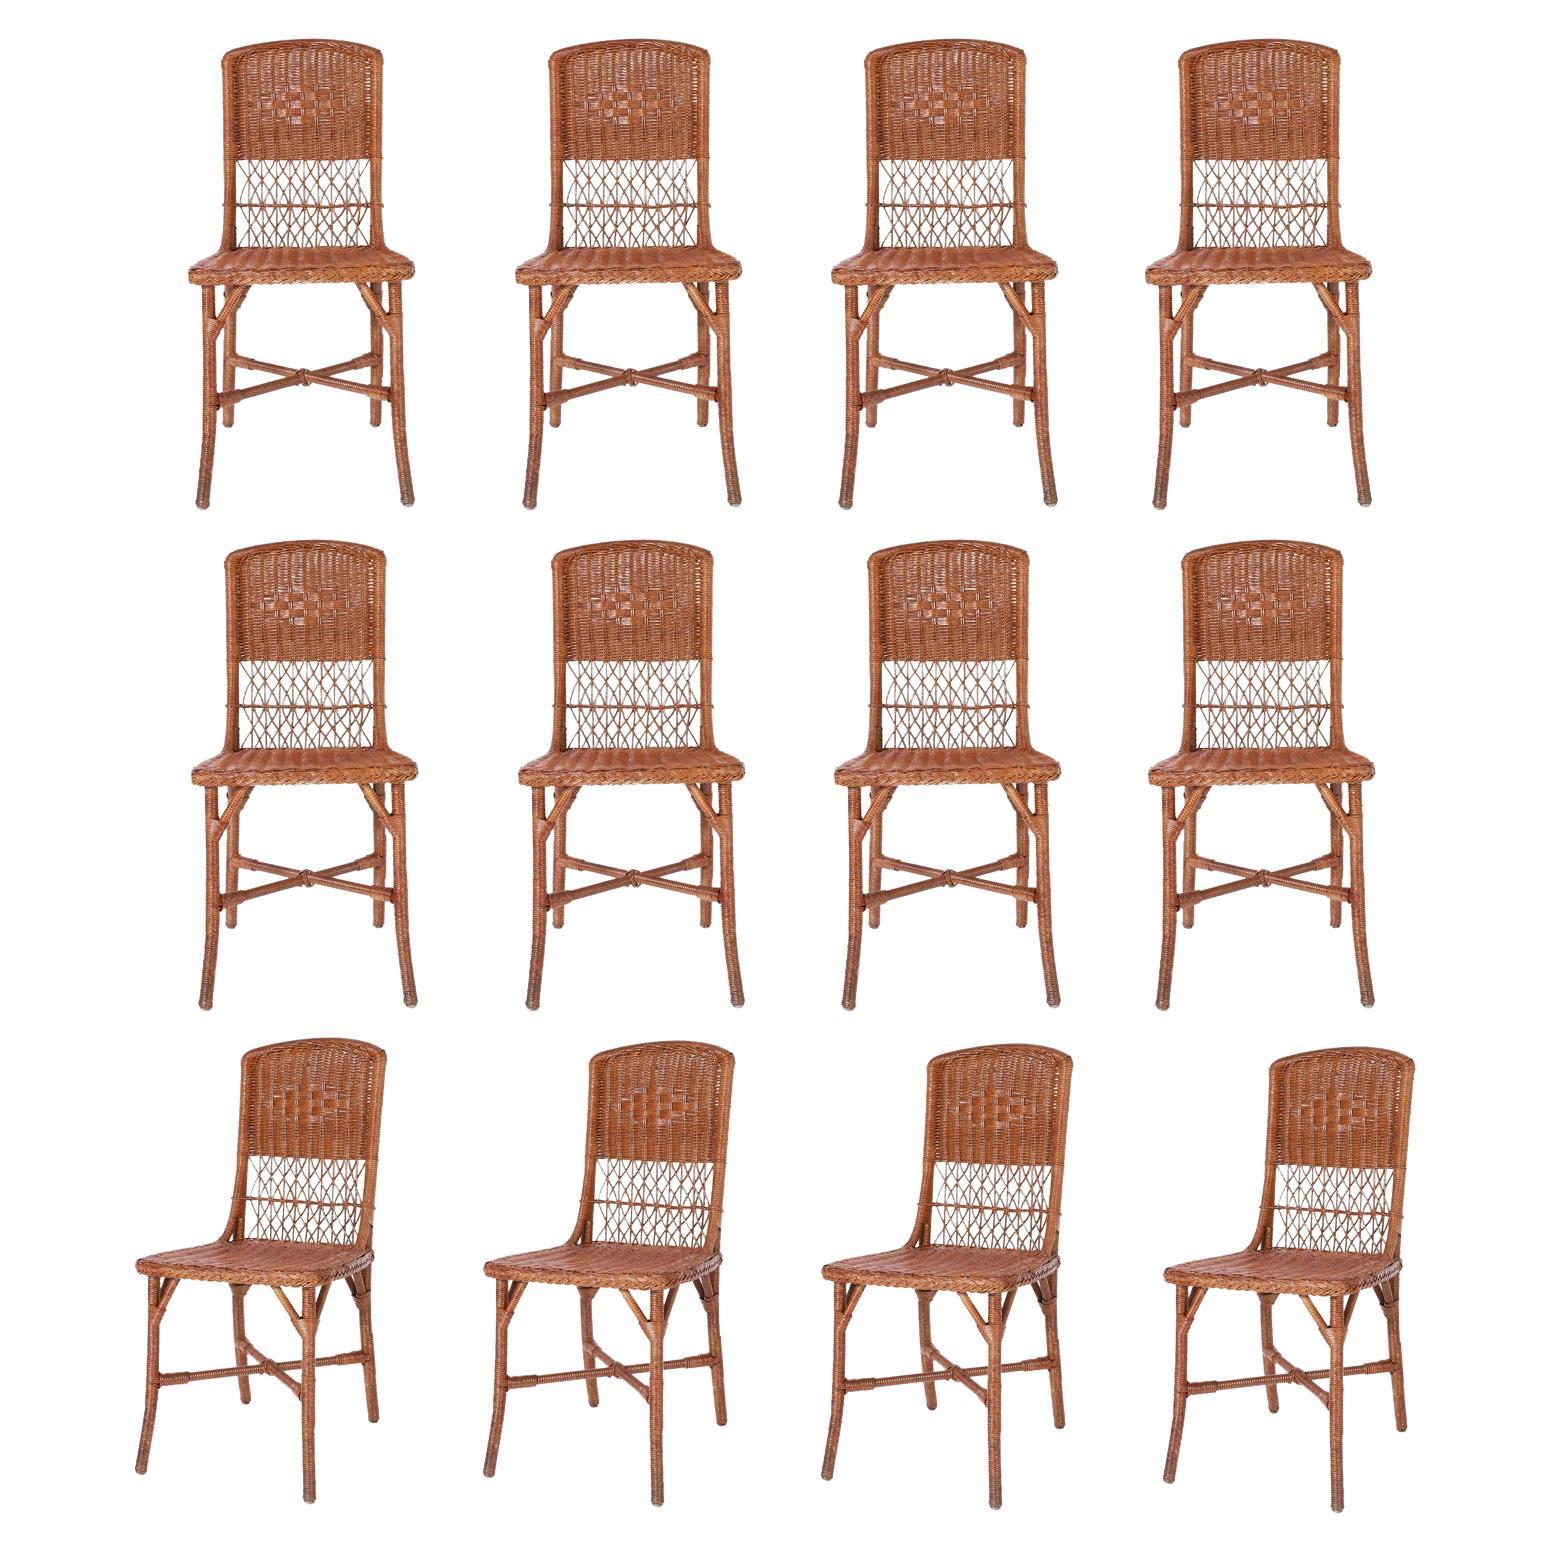 Set of Twelve Vintage Wicker Dining Chairs For Sale